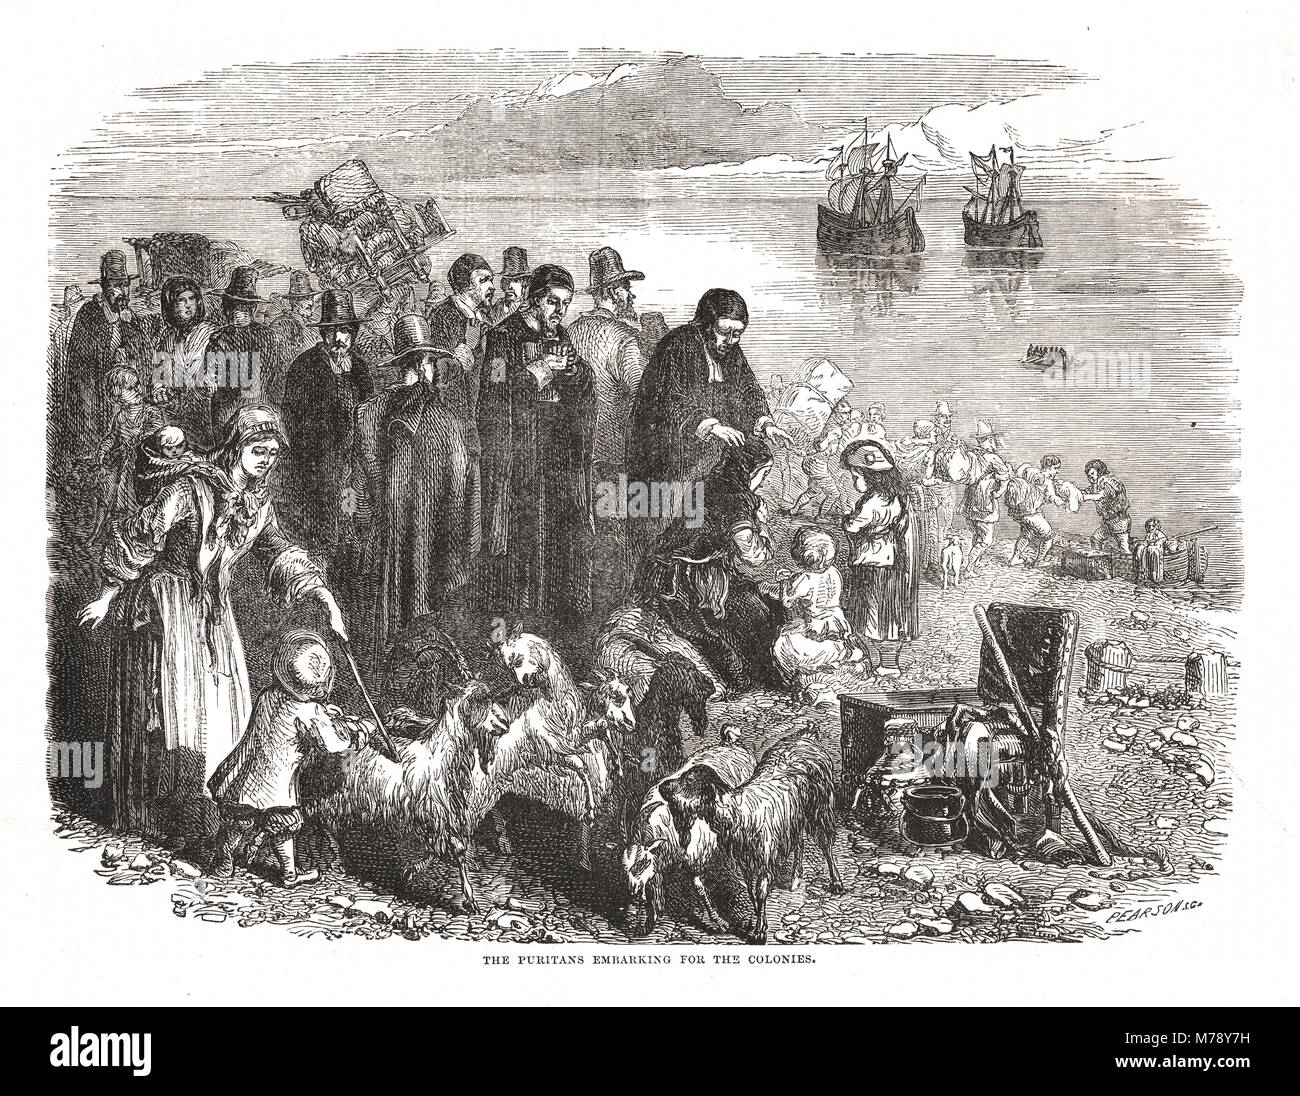 Puritans embarking for the New England colonies, 17th Century Stock Photo